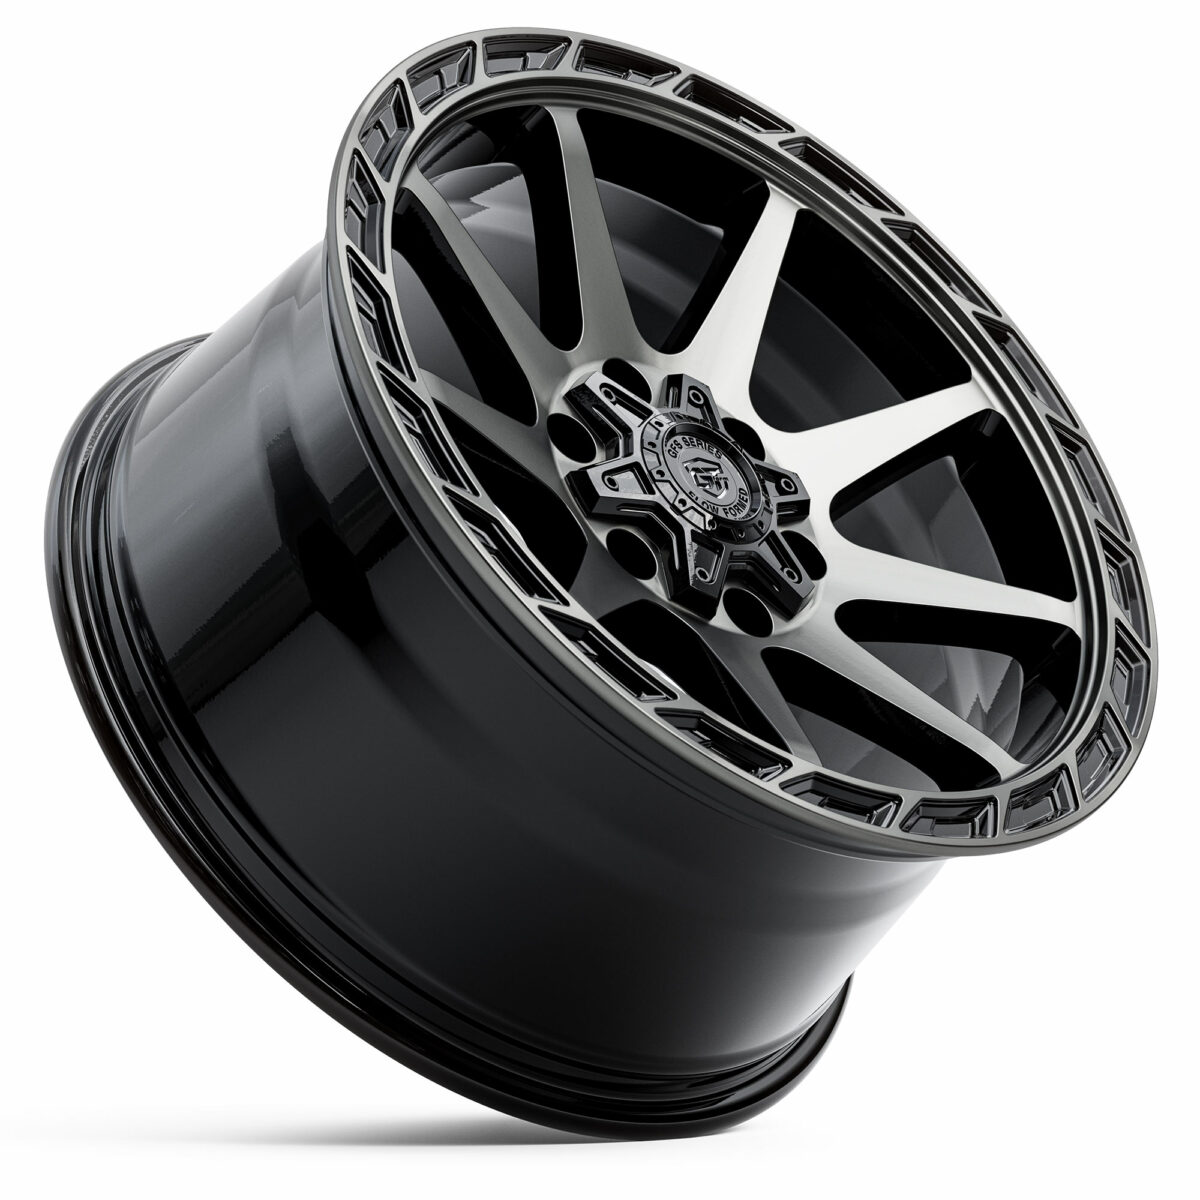 4X4 WHEELS GT FORM GFS5 GLOSS BLACK TITNED 18 20 INCH OFFROAD RIMS FOR 4WD SUV